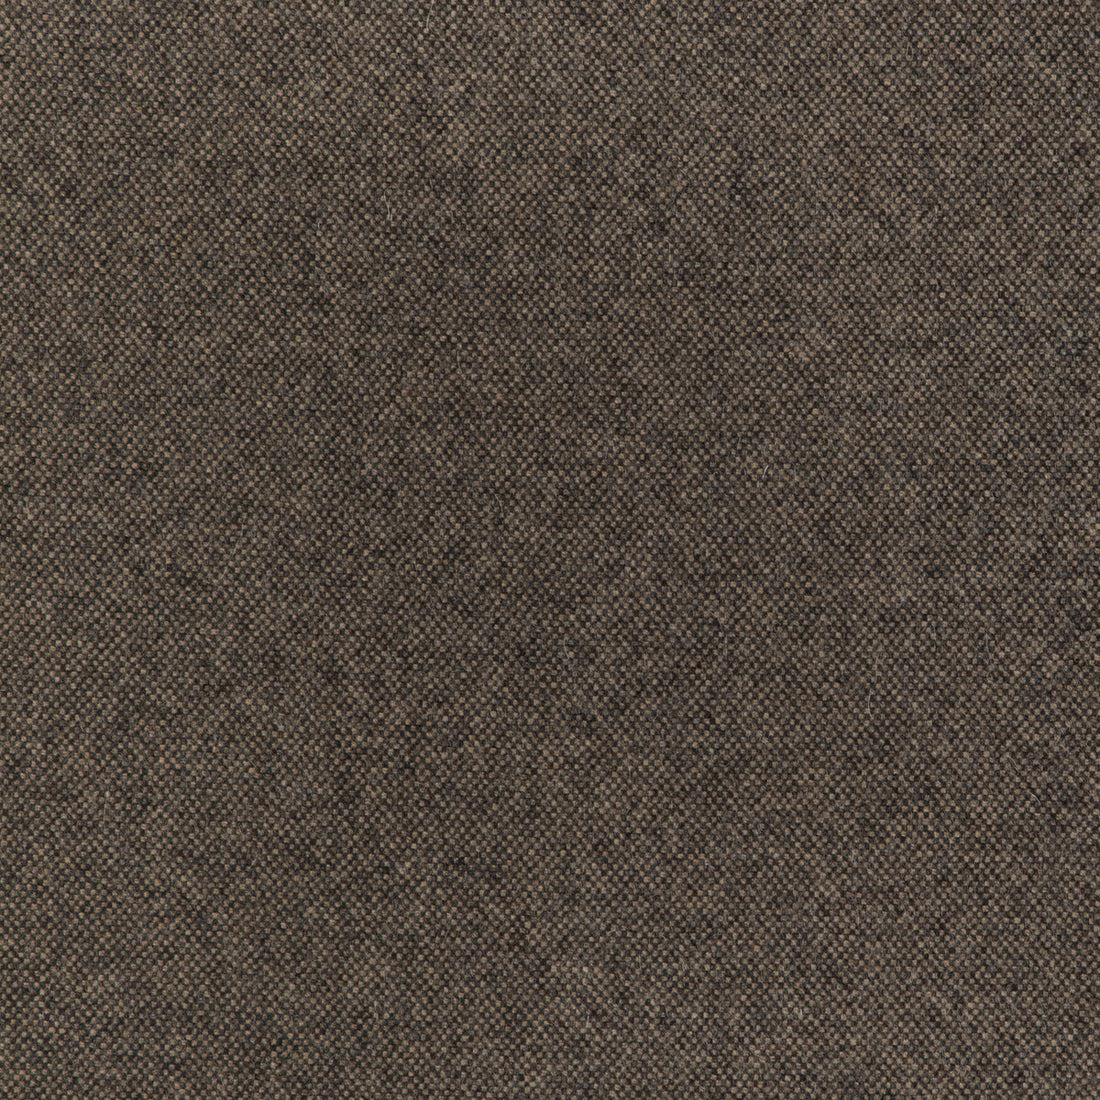 Manchester Wool fabric in java color - pattern 37026.8106.0 - by Kravet Contract